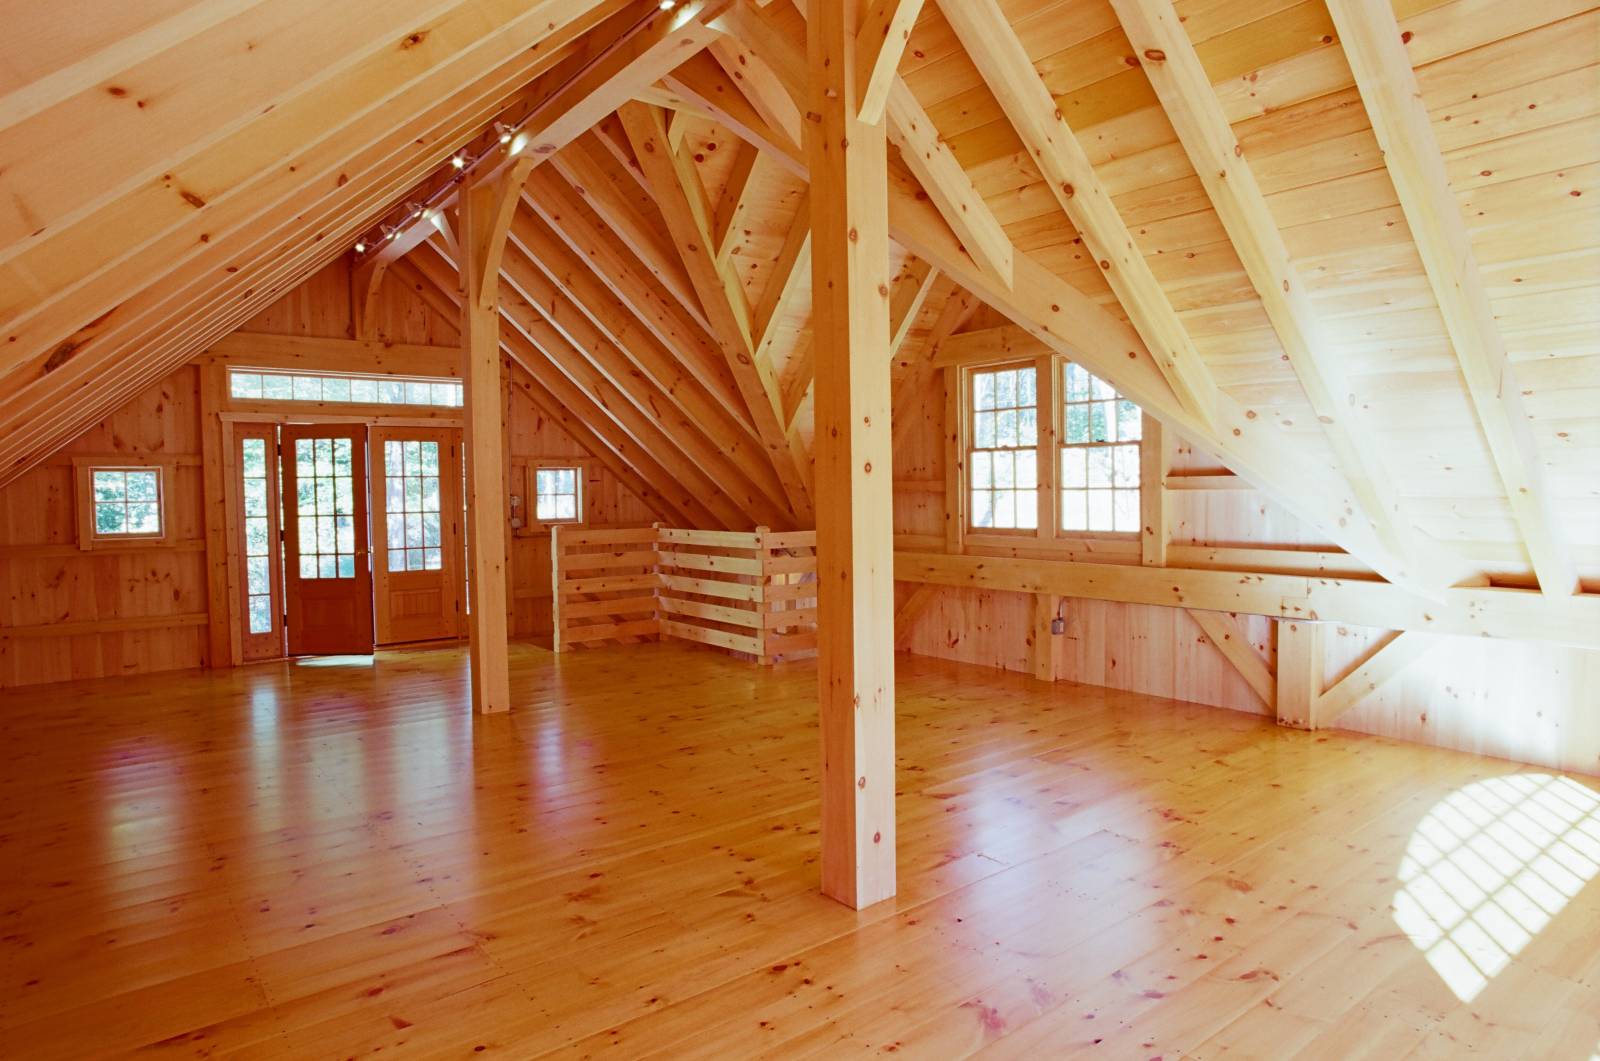 Spacious & bright post & beam bank barn second floor interior • structural ridge • exposed timbers